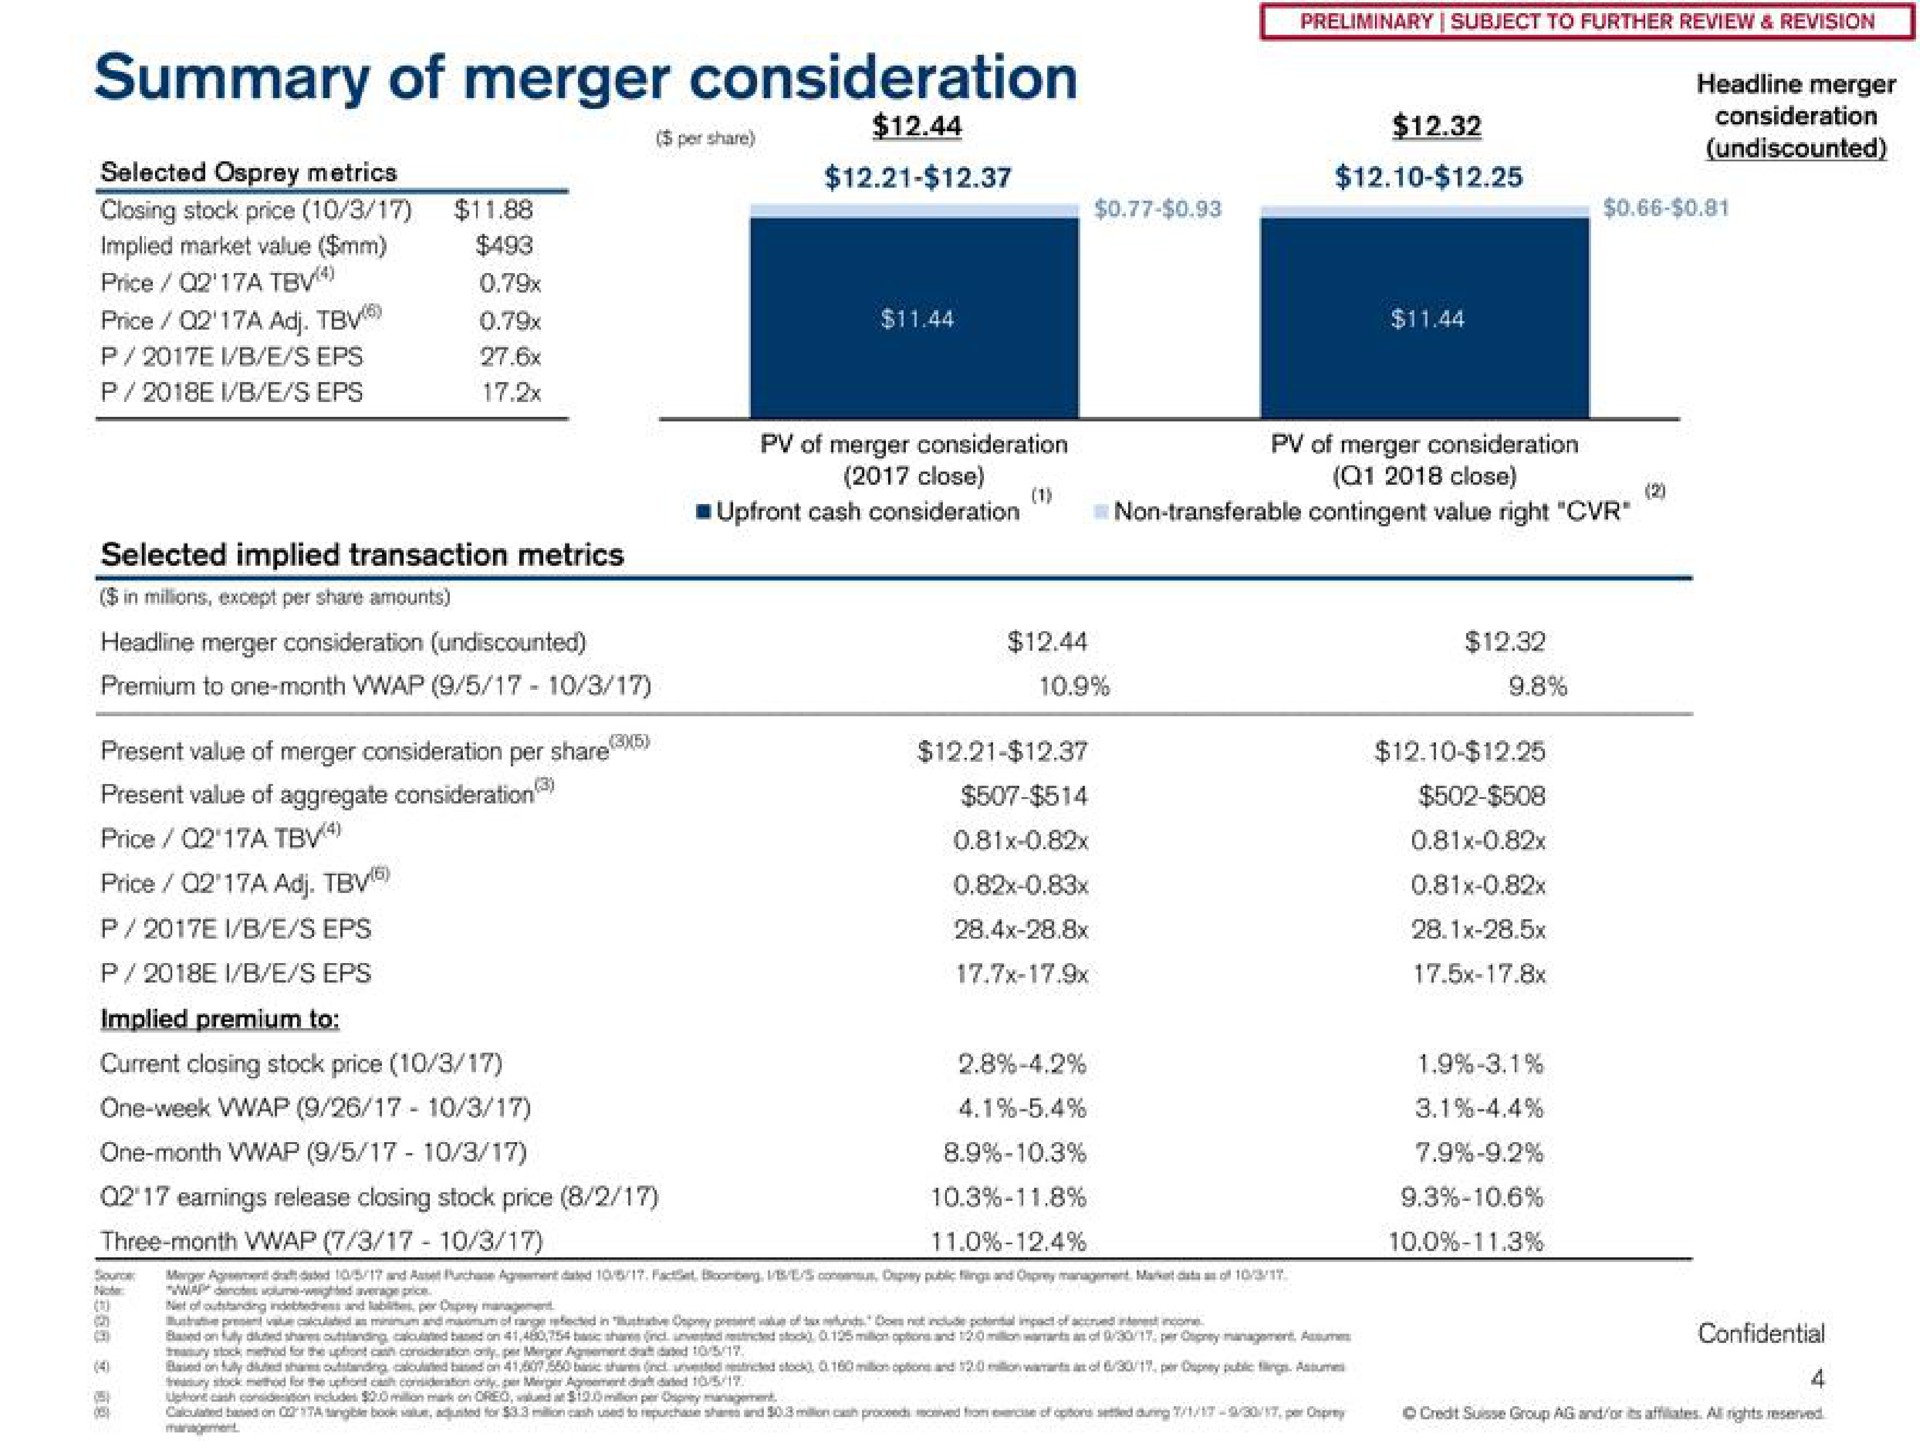 summary of merger consideration | Credit Suisse